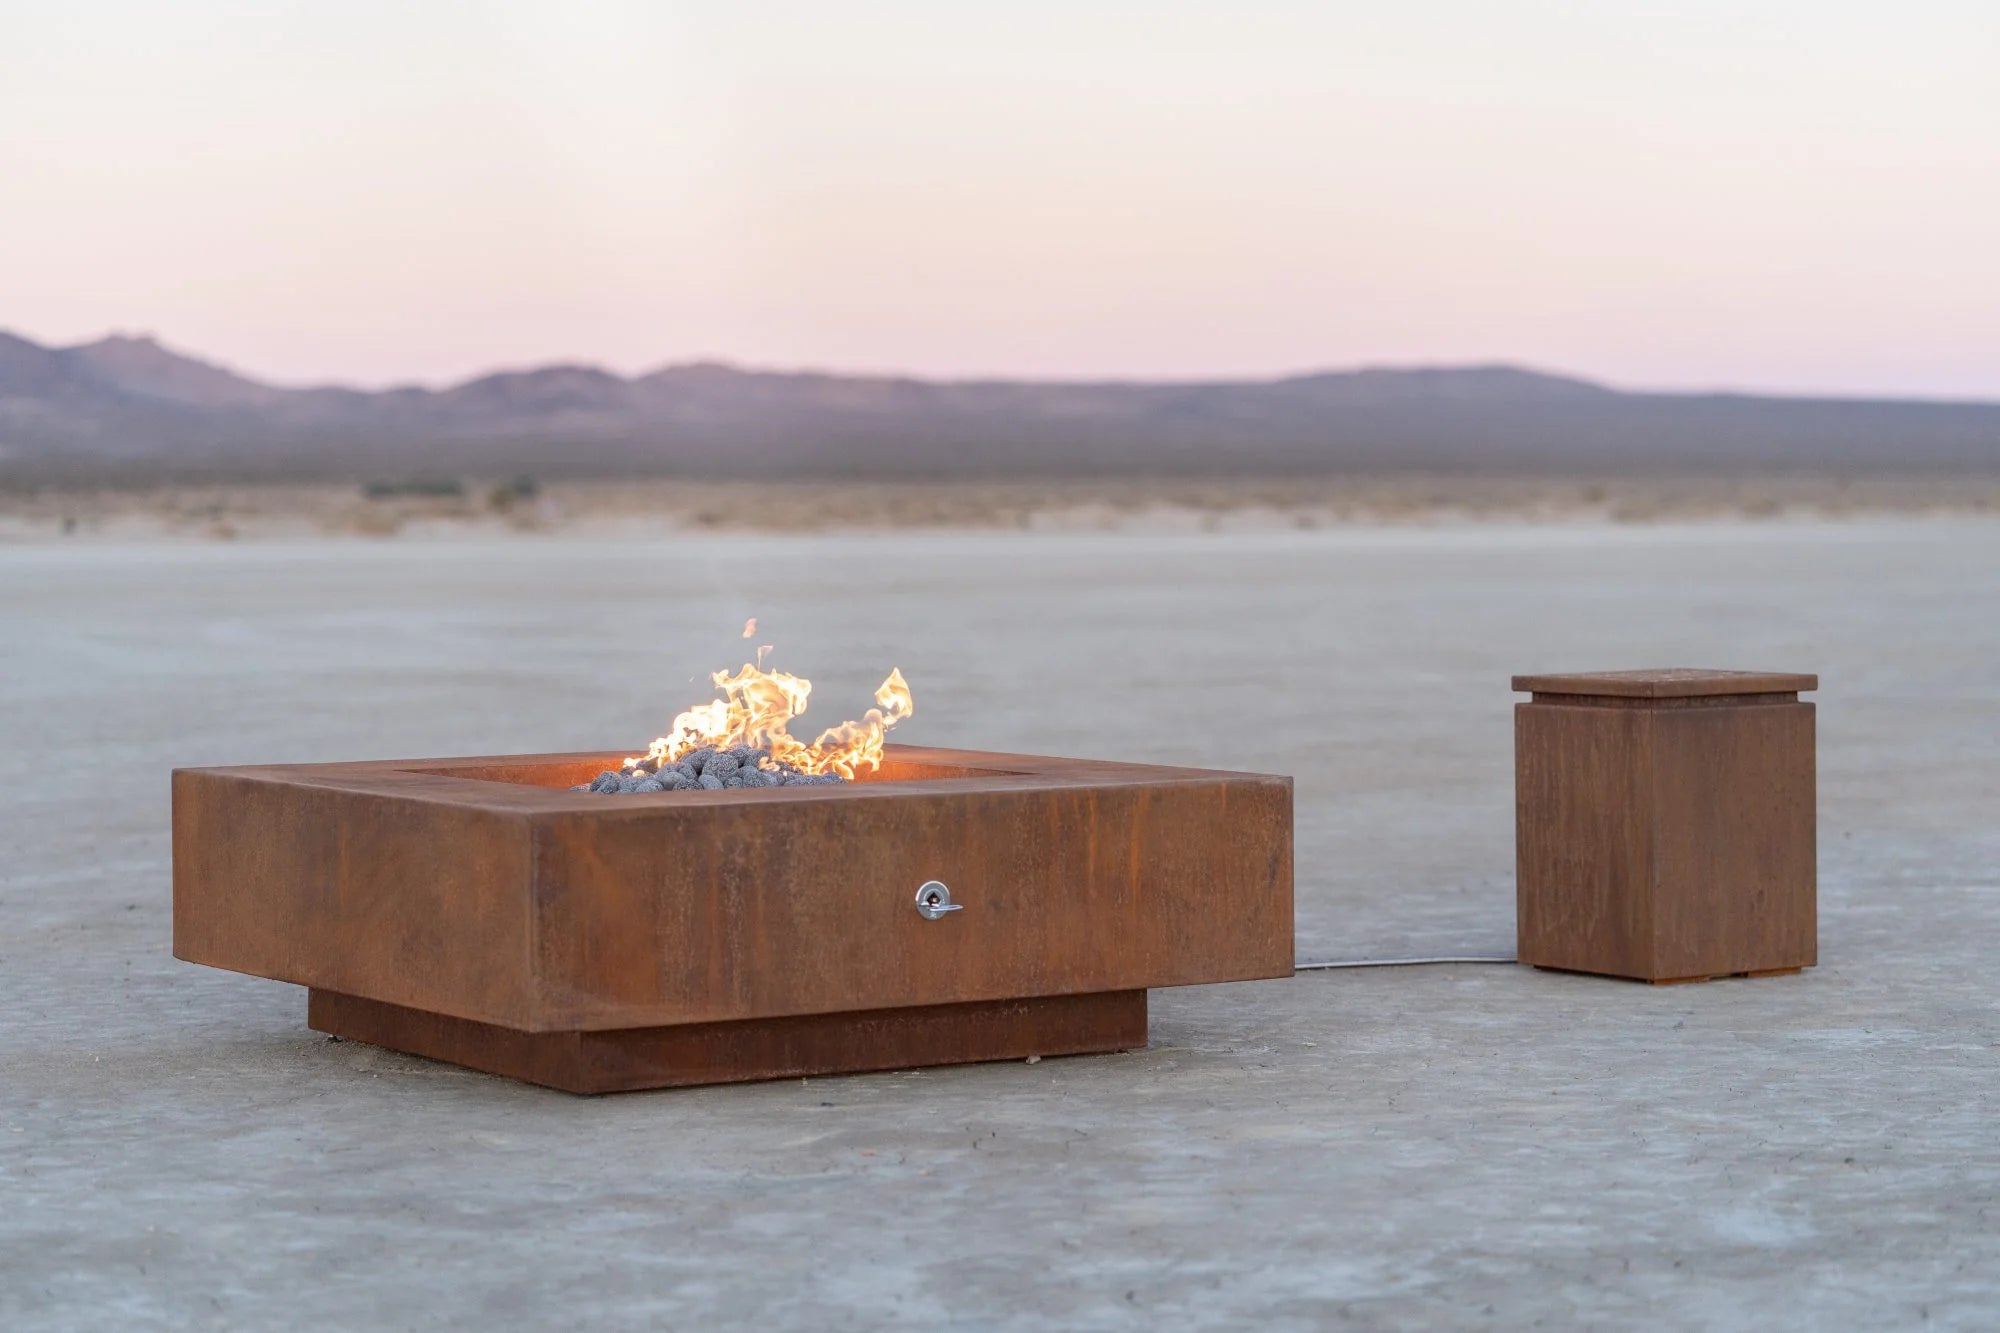 The Outdoor Plus Square Cabo Fire Pit in Corten Steel